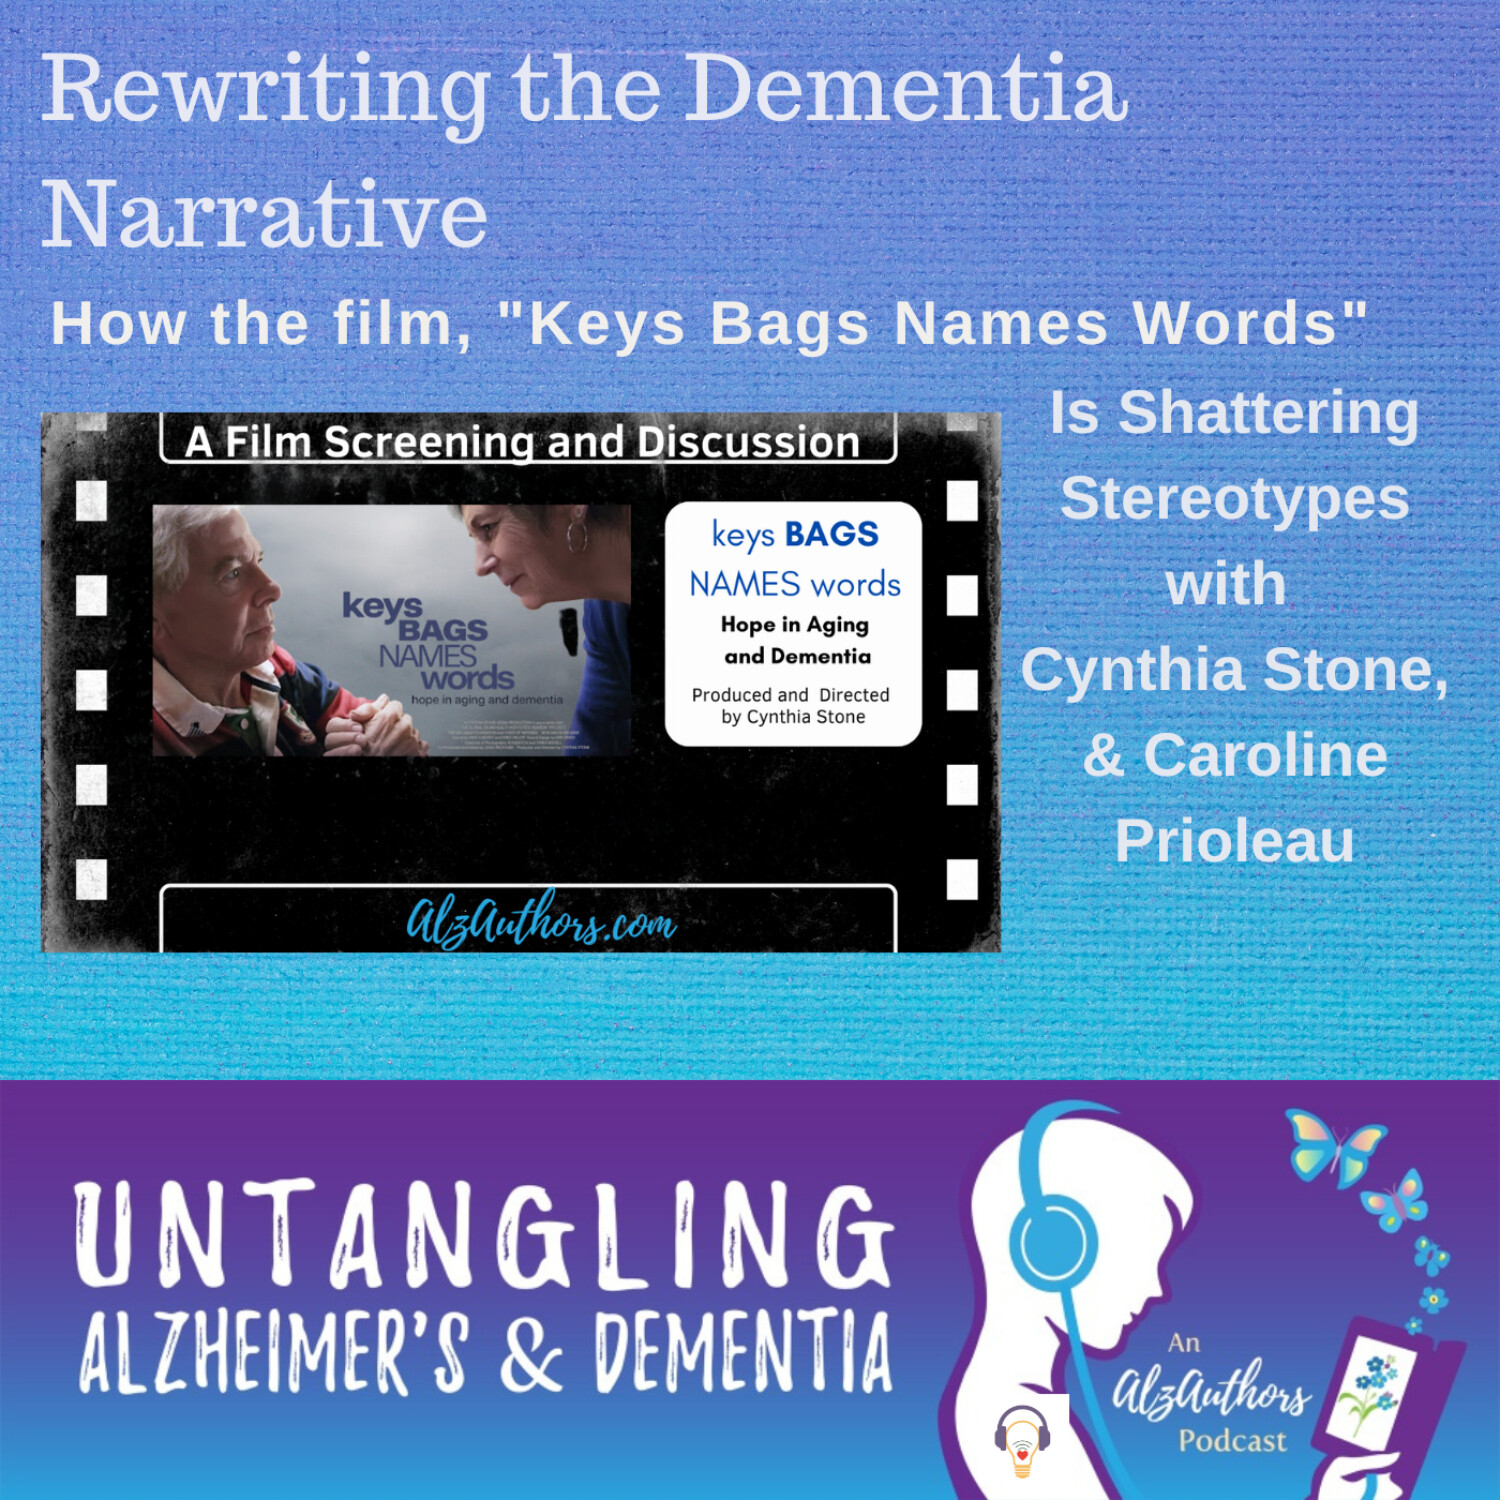 Rewriting the Dementia Narrative: How “Keys Bags Names Words” Is Shattering Stereotypes with Cynthia Stone, Caroline Prioleau